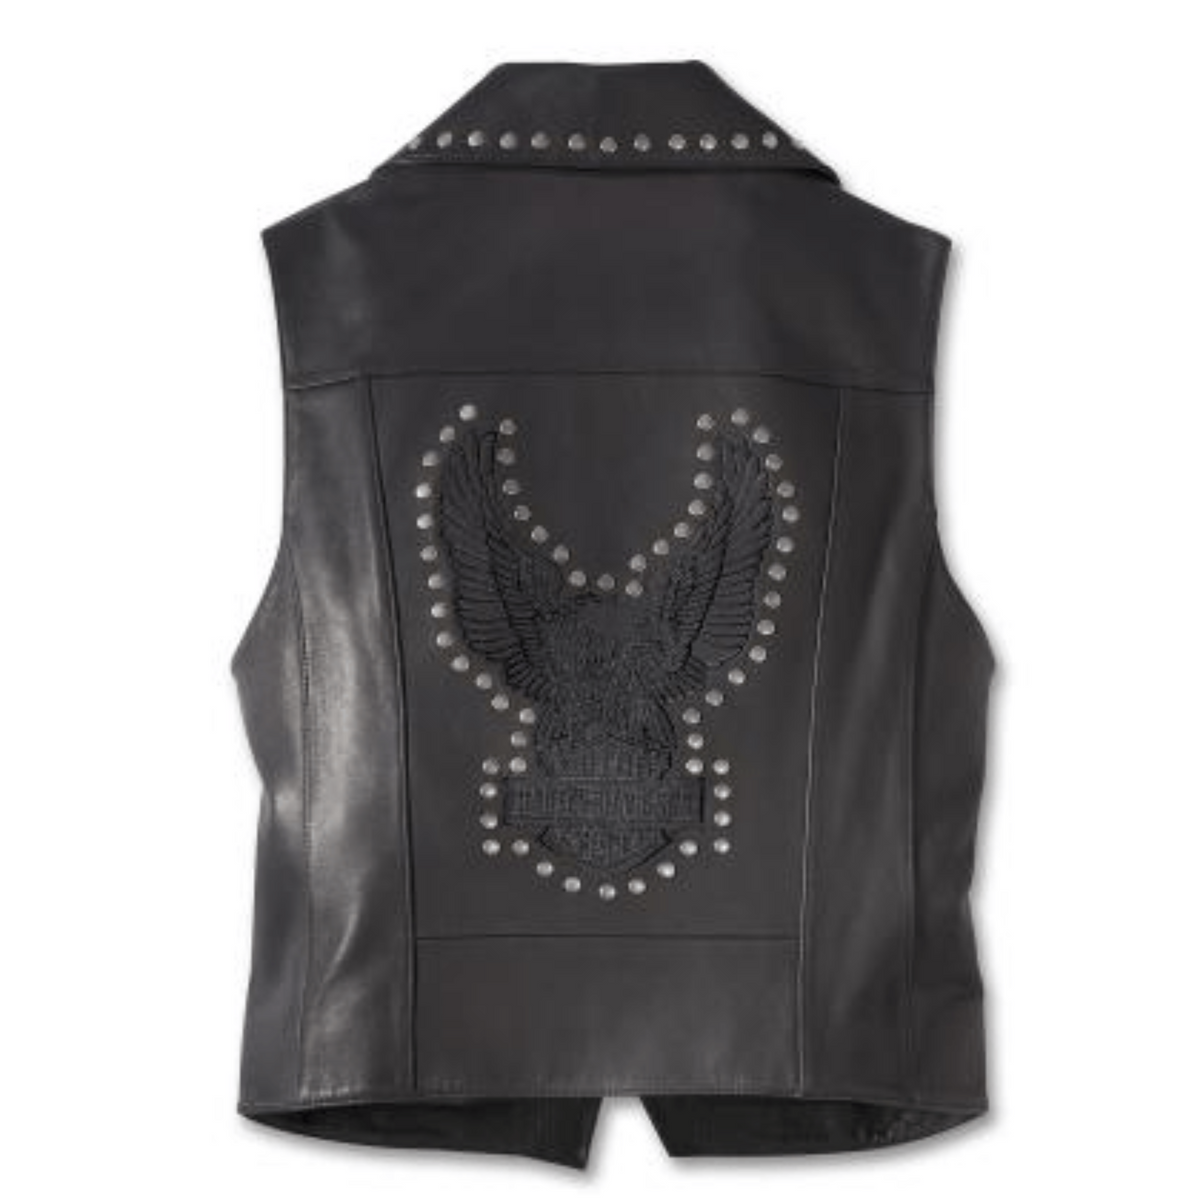 Women's Classic Harley Davidson Leather Vest Timeless Motorcycle Style Iconic Women's Harley Davidson Leather Vest